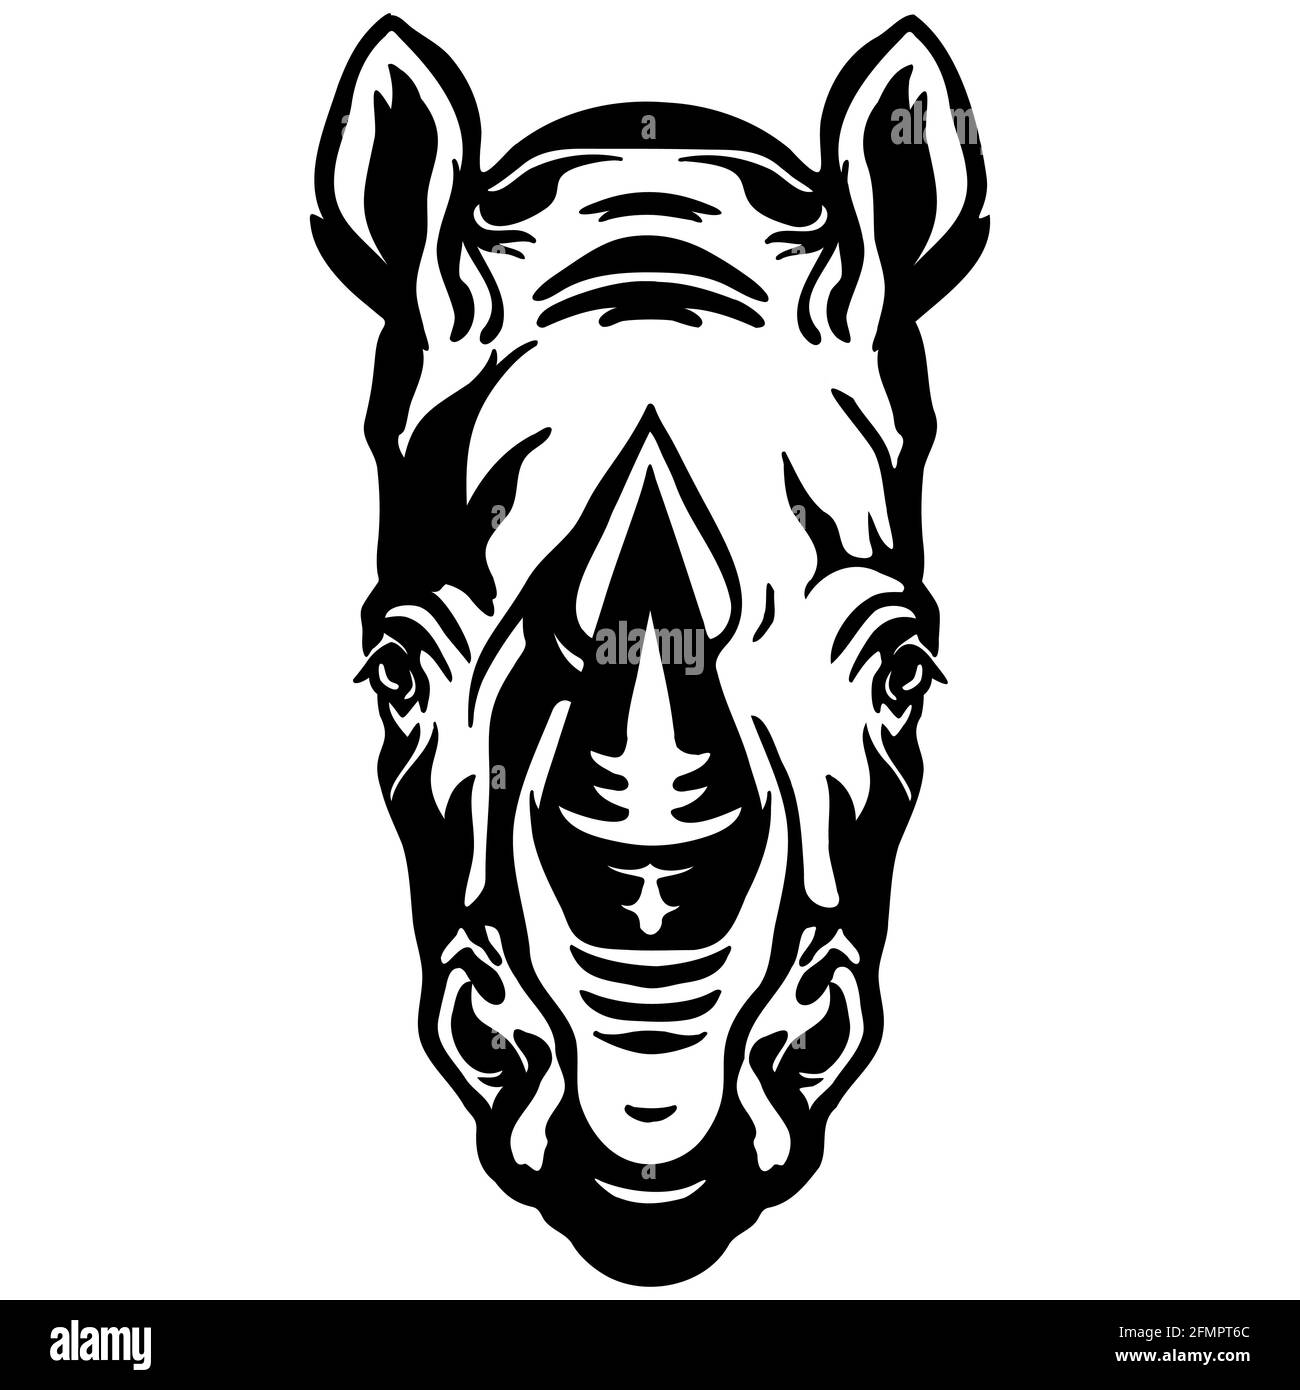 Mascot. Head of rhino. Vector illustration black color front view of wild animal isolated on white background. For decoration, print, design, logo, sp Stock Vector